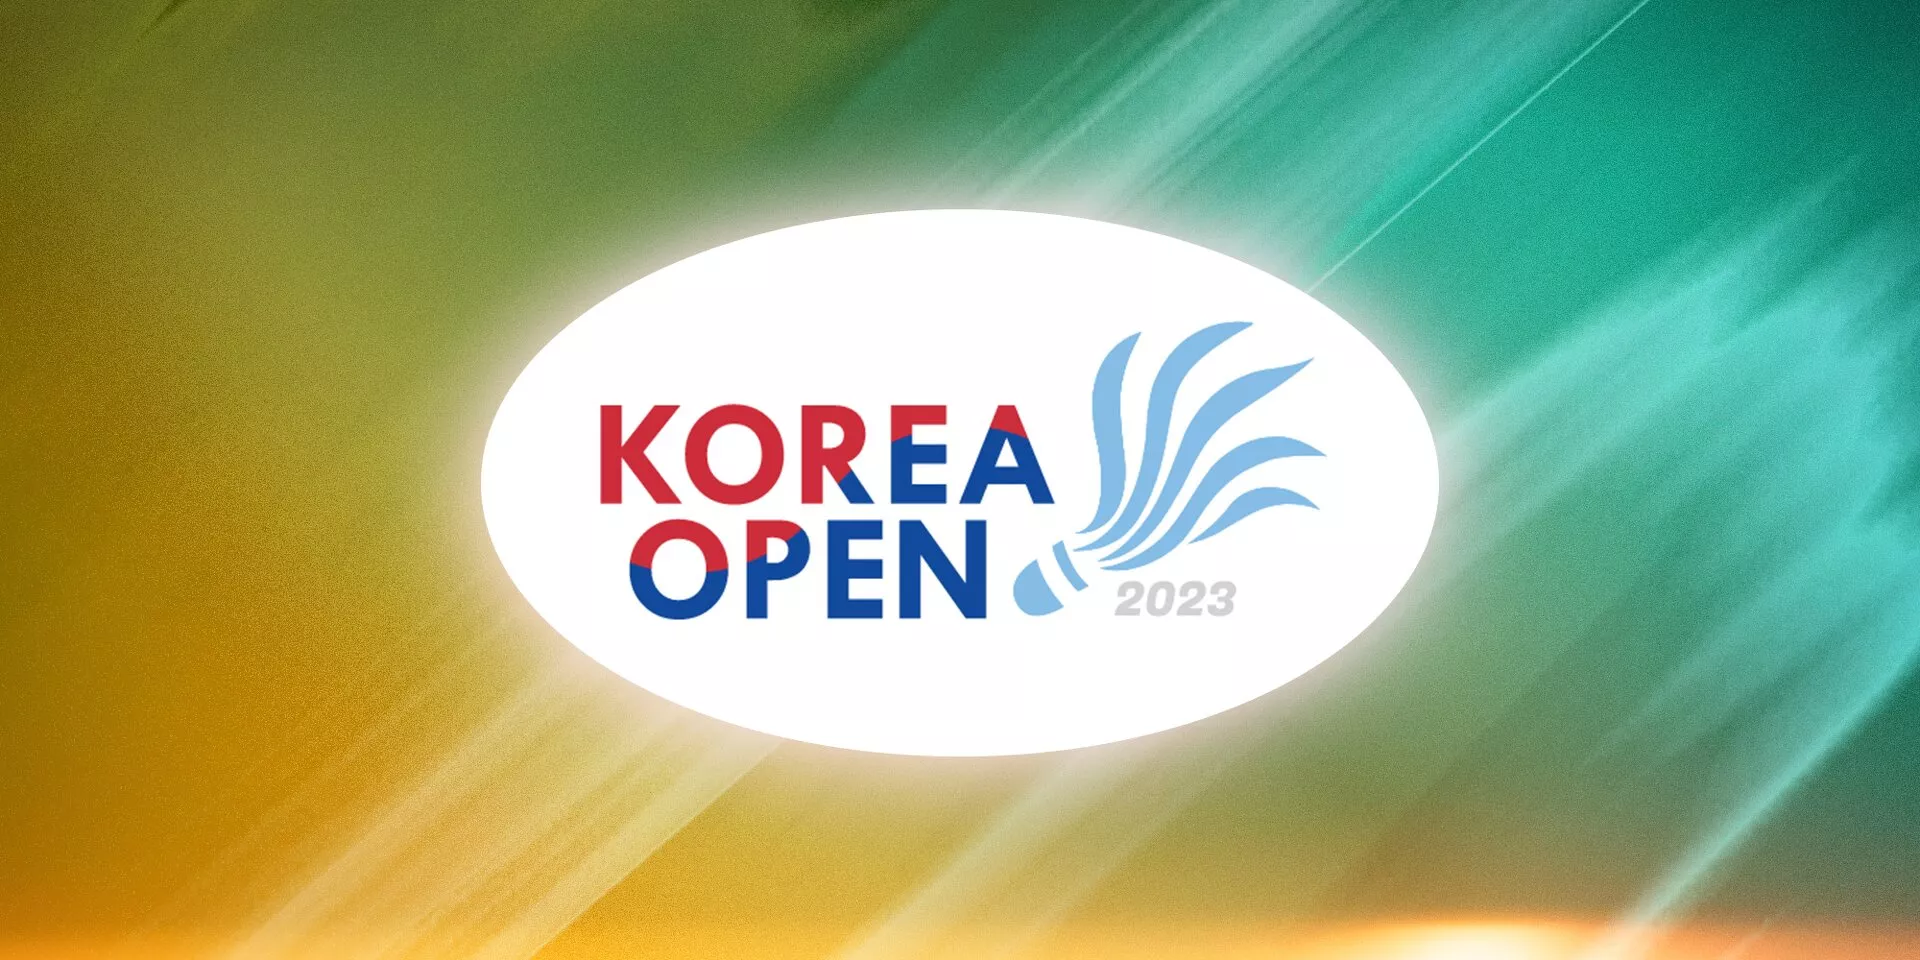 Where and how to watch Korea Open 2023 live in Indonesia?